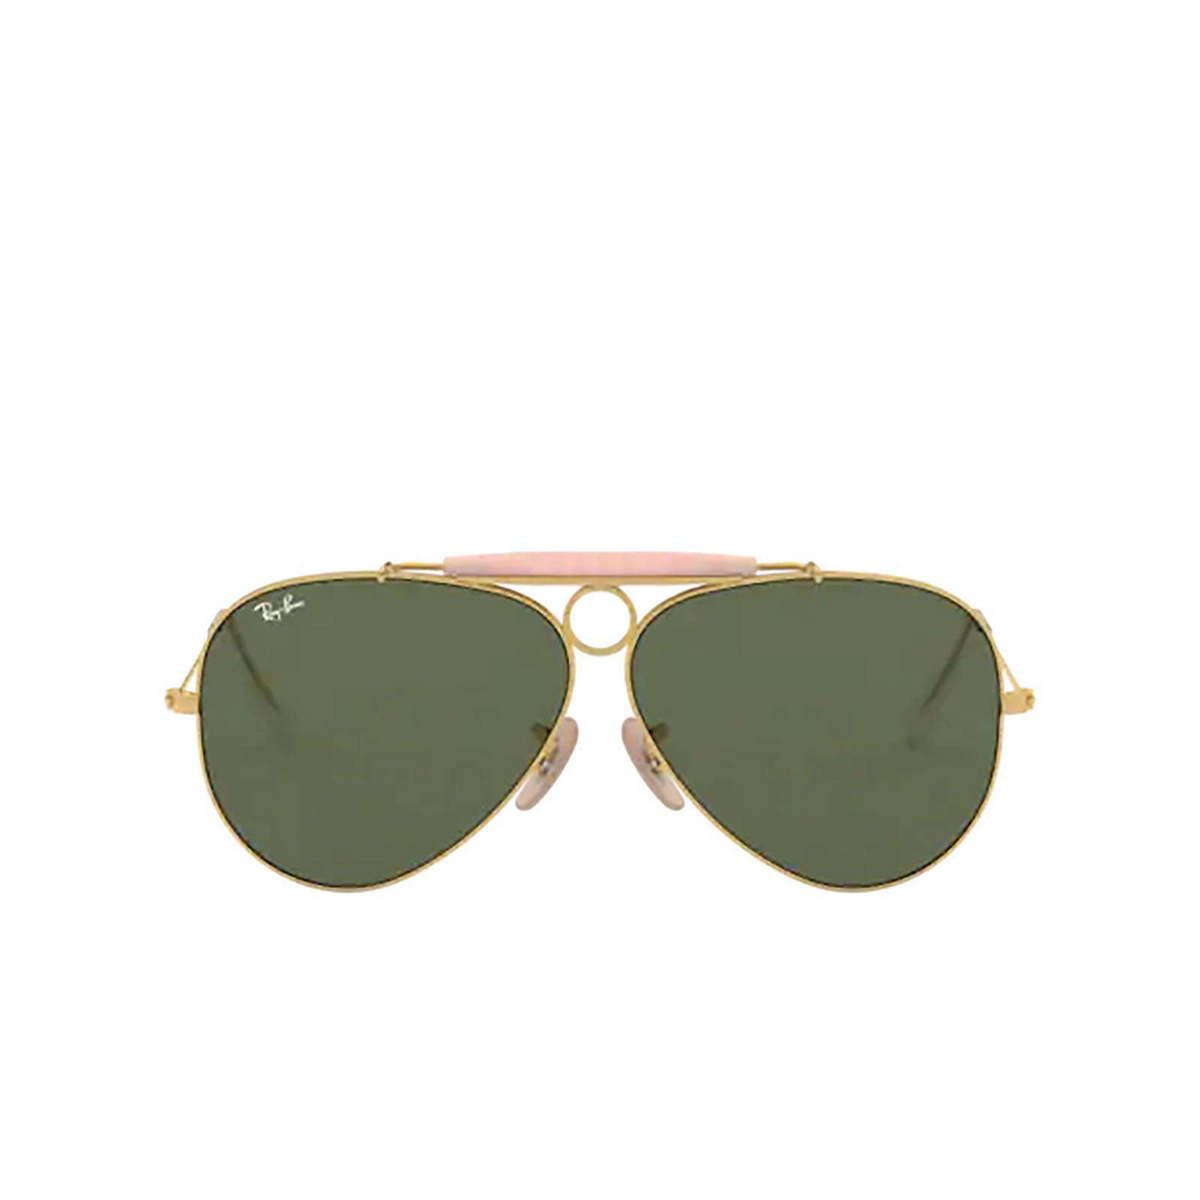 Ray-Ban SHOOTER Sunglasses 001 Arista - front view